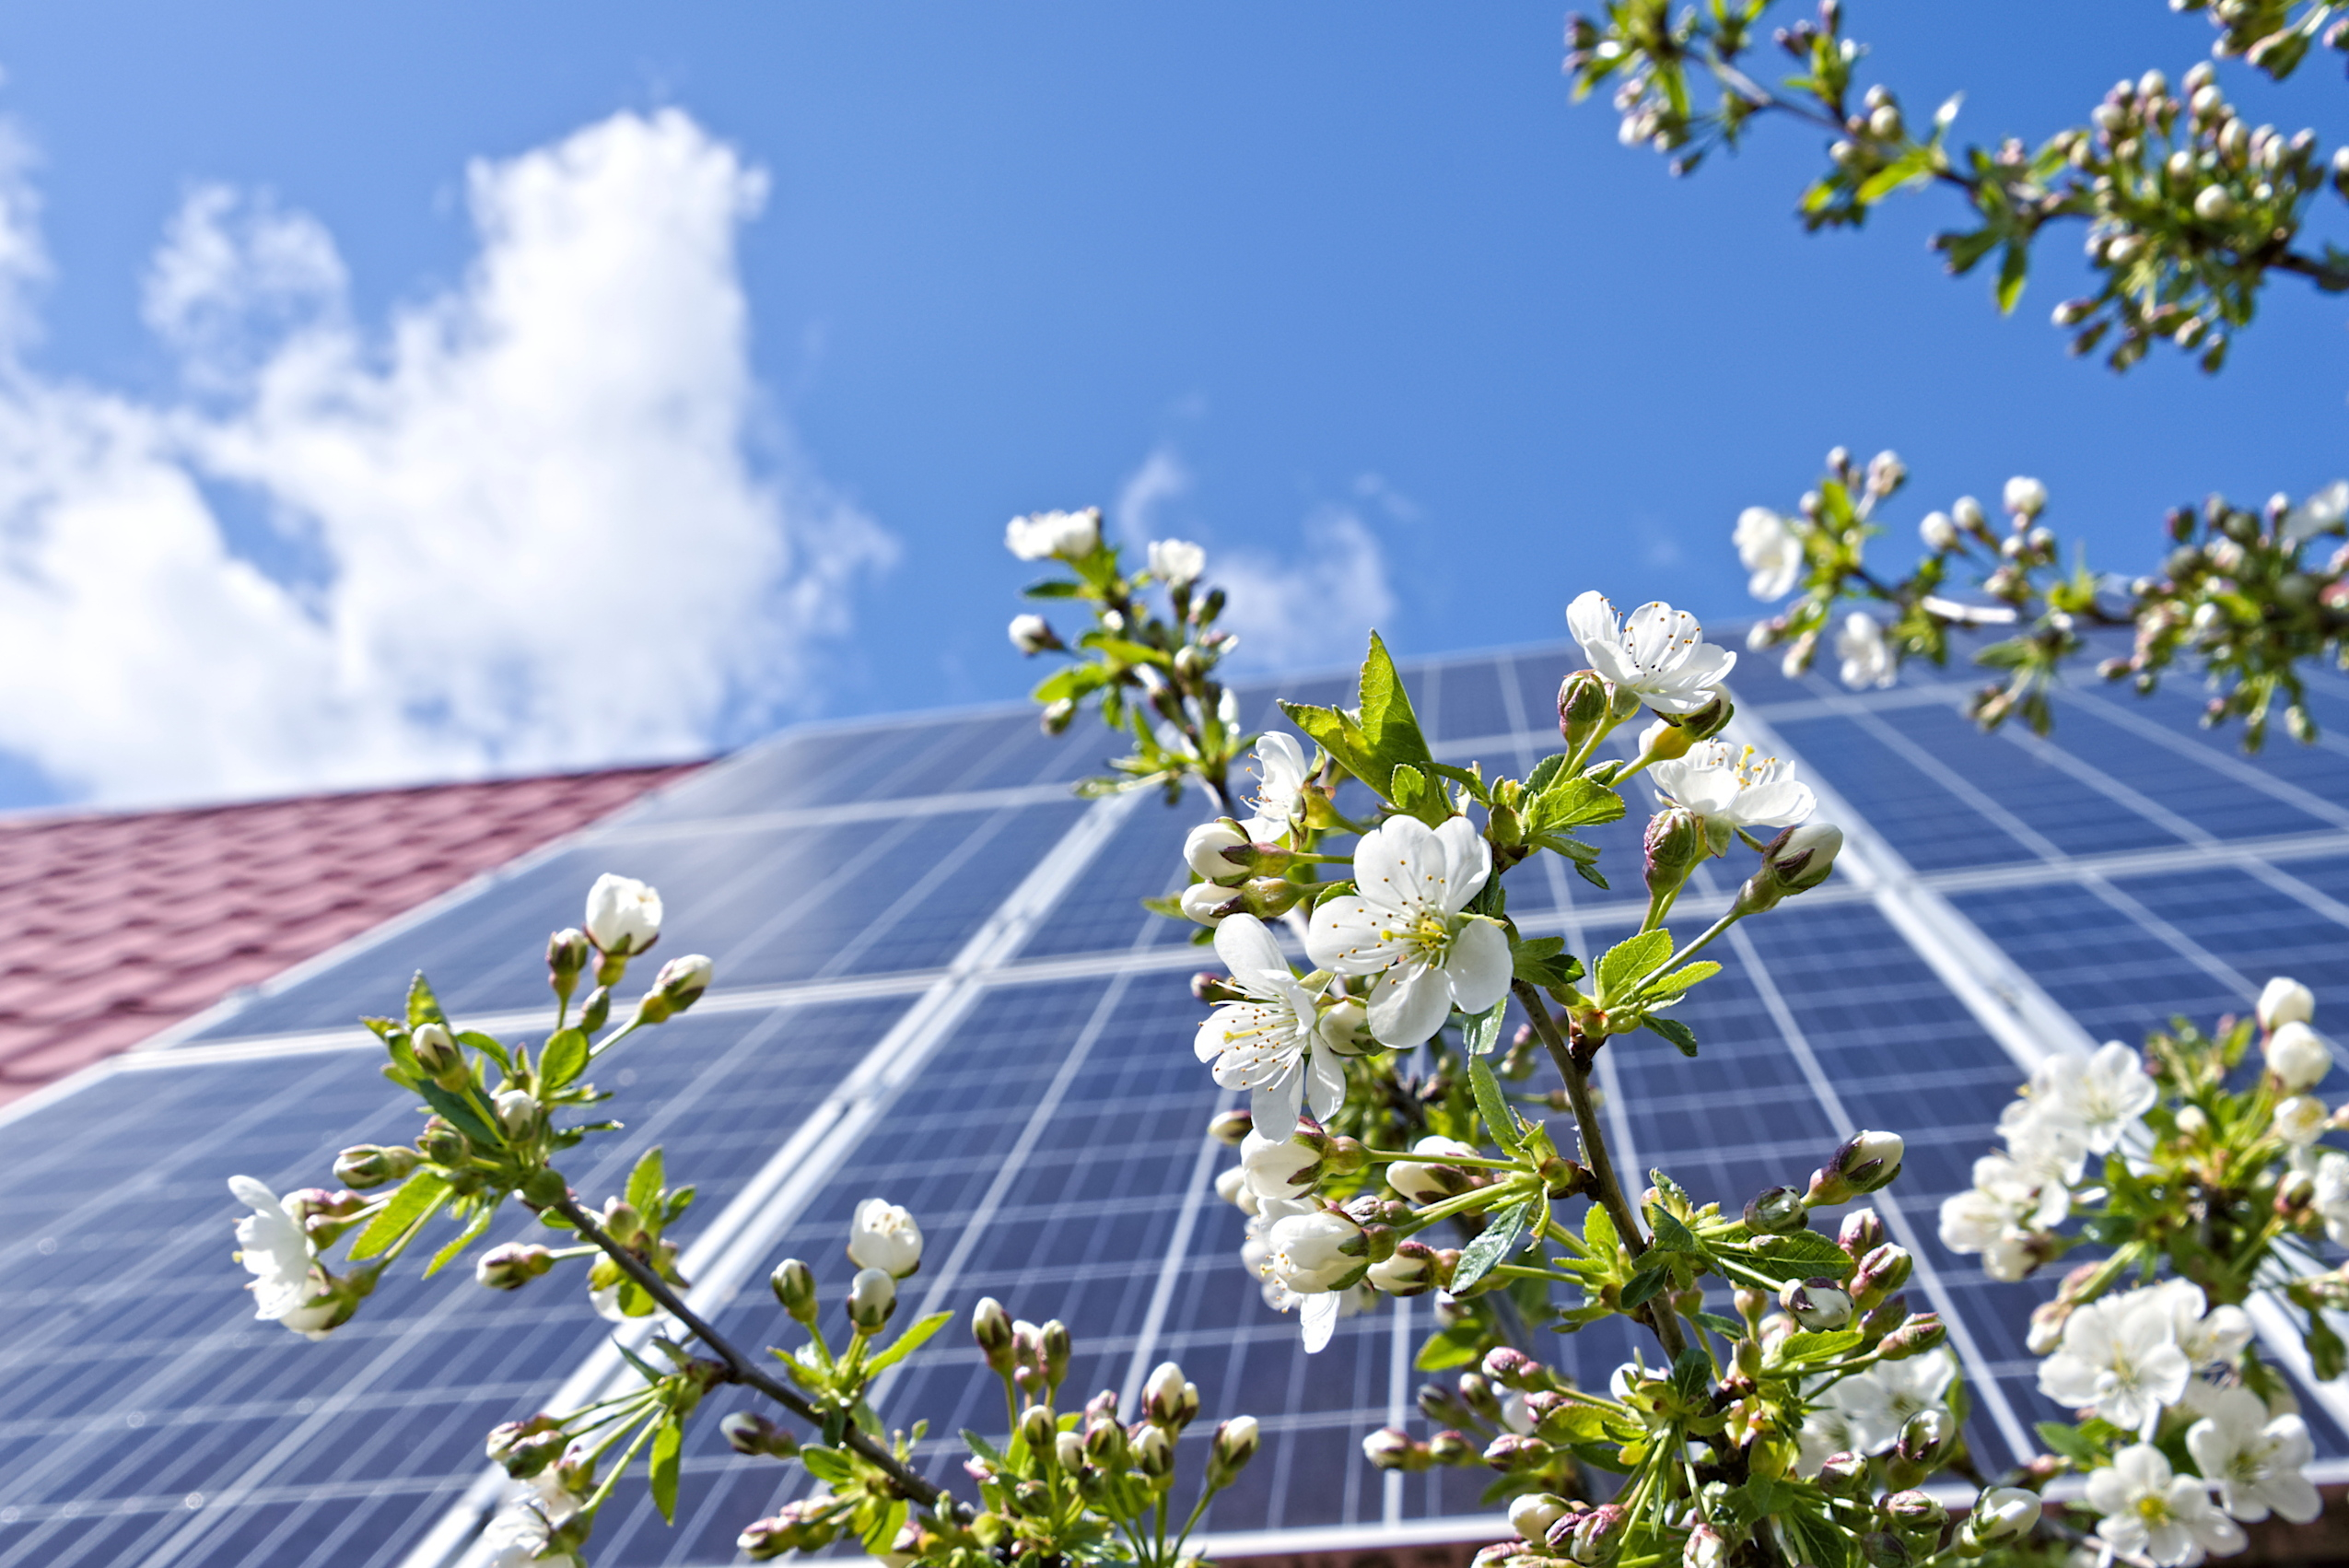 Photovoltaic,Panels,On,A,Slanted,Roof,And,Fruit,Tree,Flowers